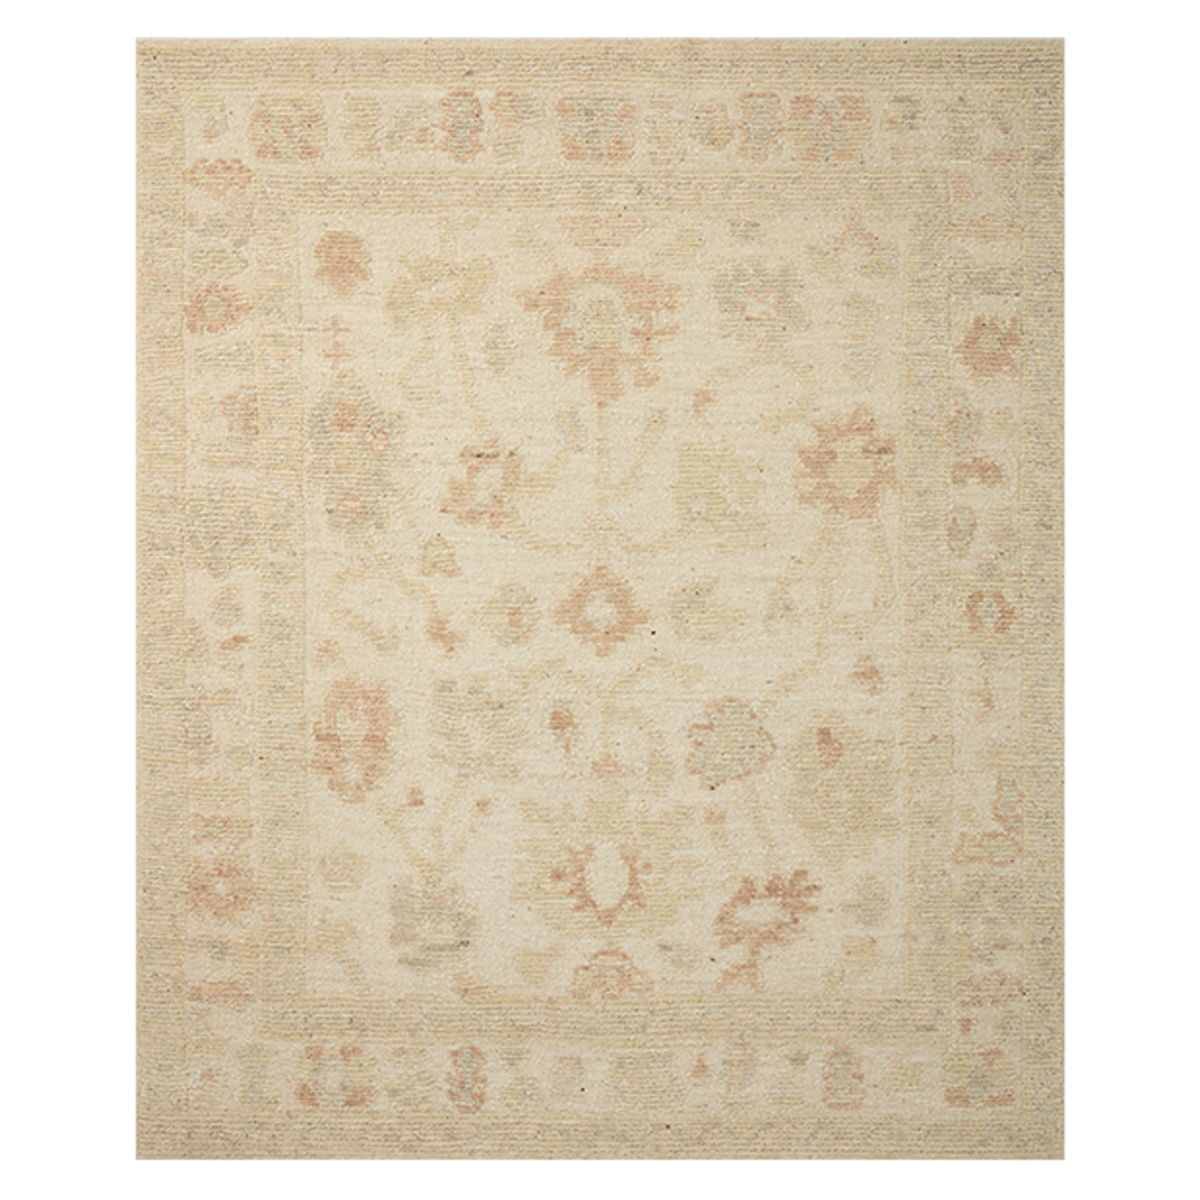 Steps Mat in Cream - Ethical Home Decor